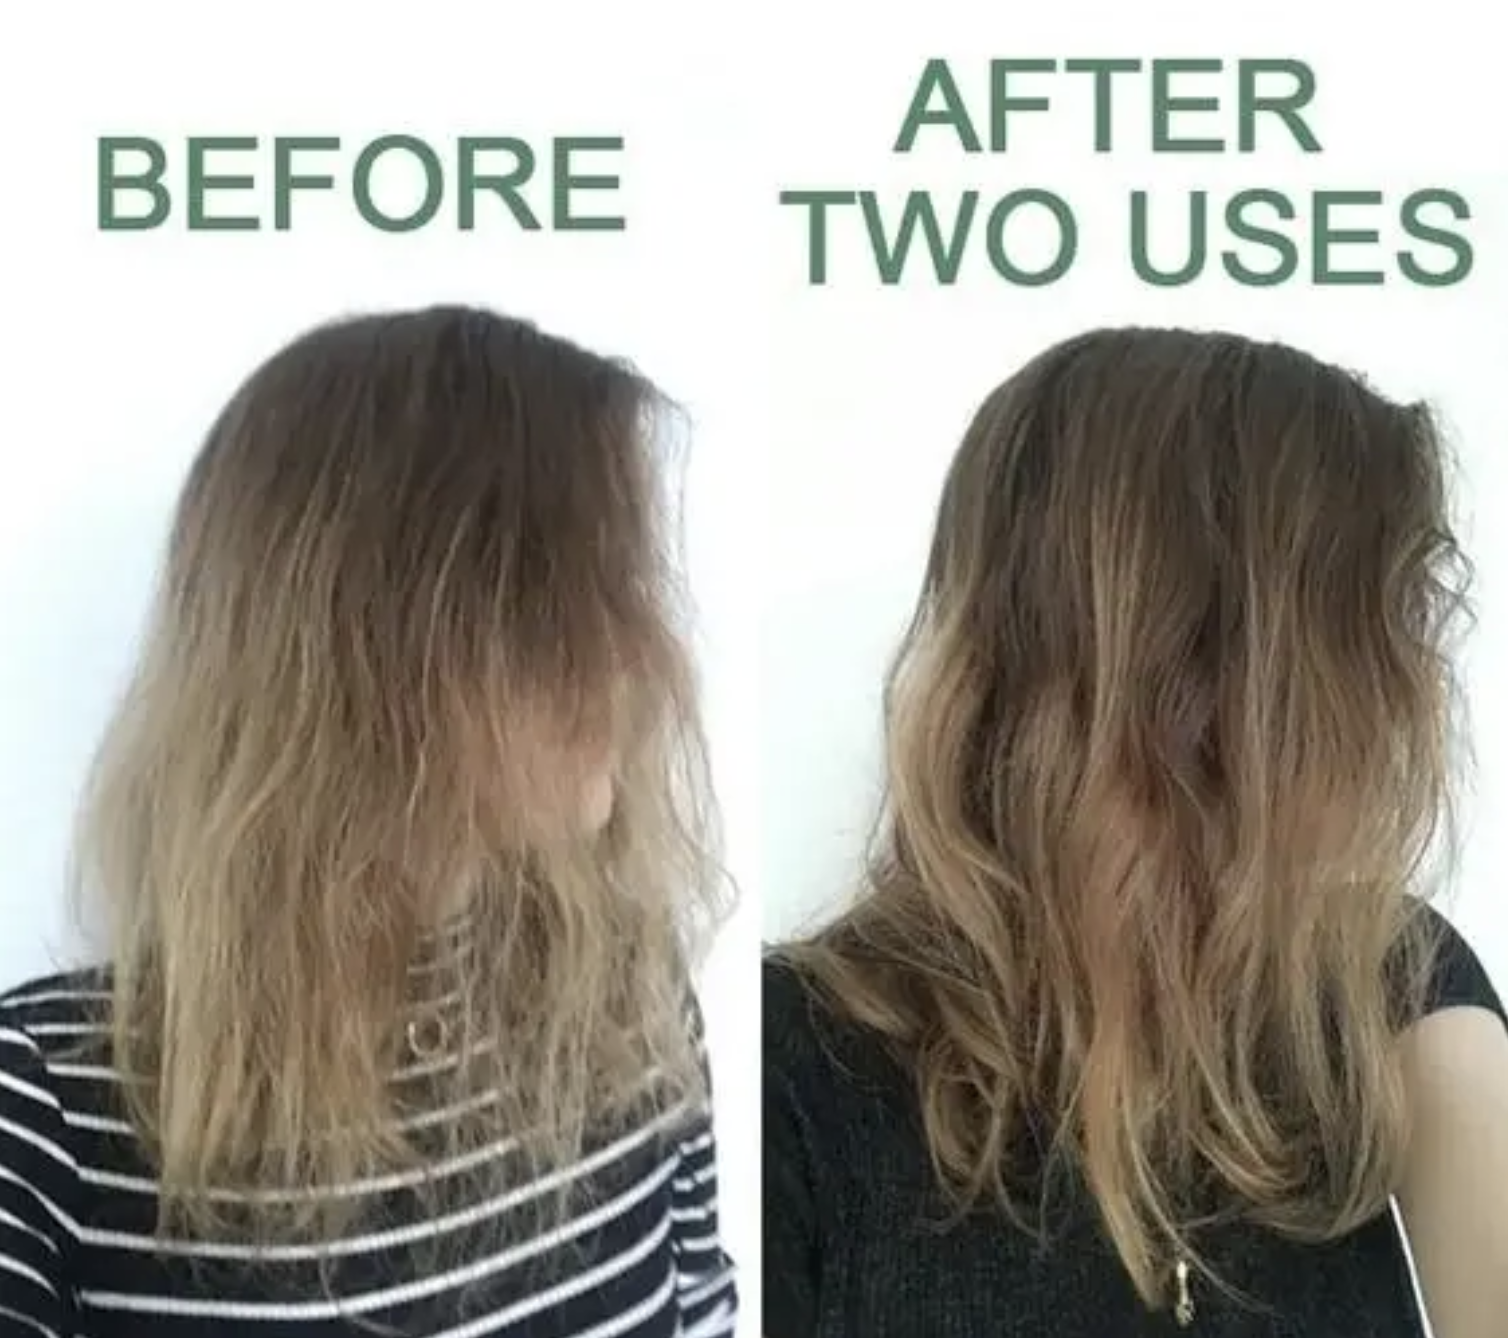 Before and after image of a BuzzFeed editor&#x27;s hair, with the after image looking much shinier and curling more 